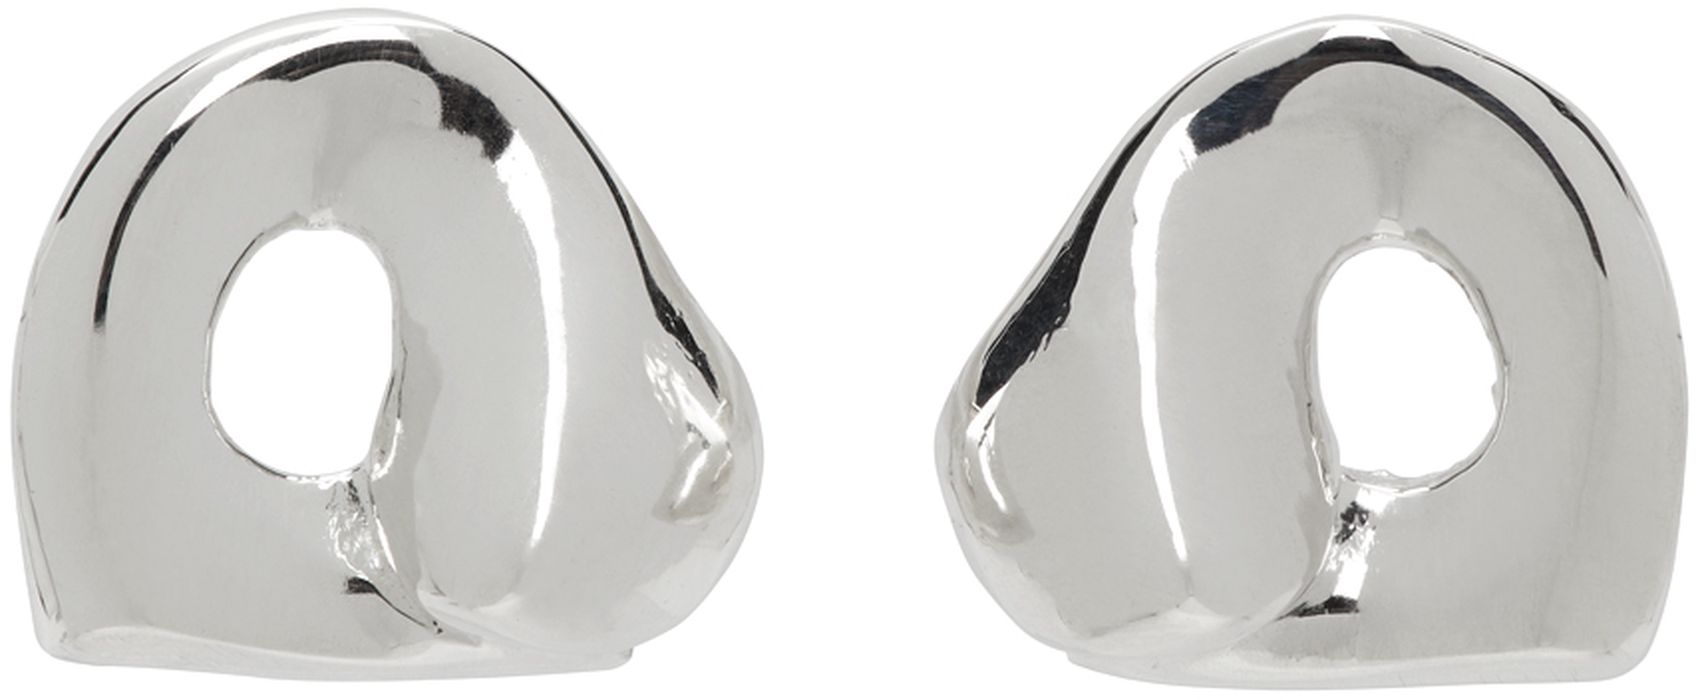 AGMES Silver Simone Bodmer Turner Edition Gertrude Stud Earrings